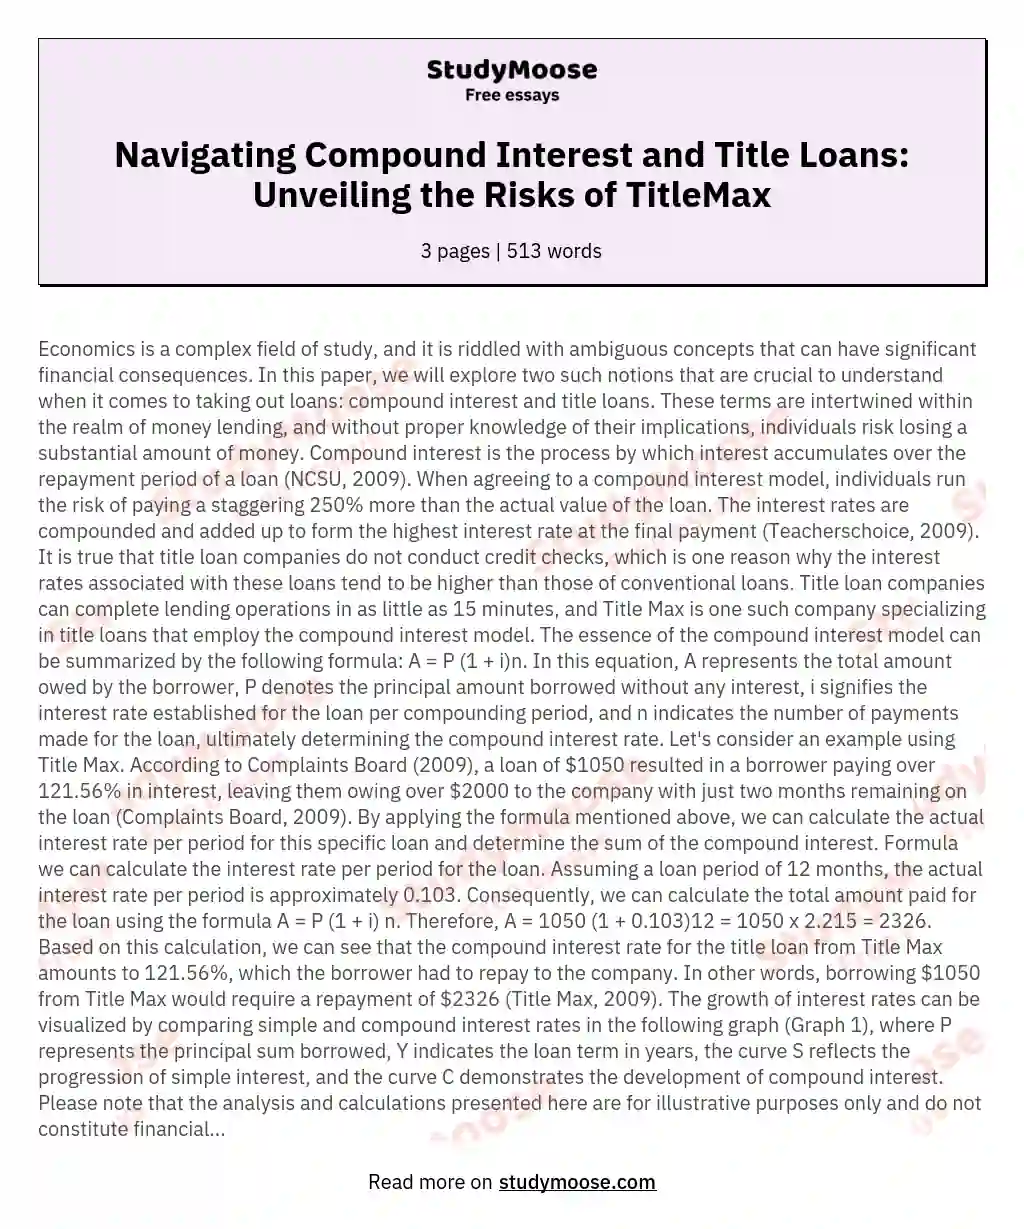 Navigating Compound Interest and Title Loans: Unveiling the Risks of TitleMax essay